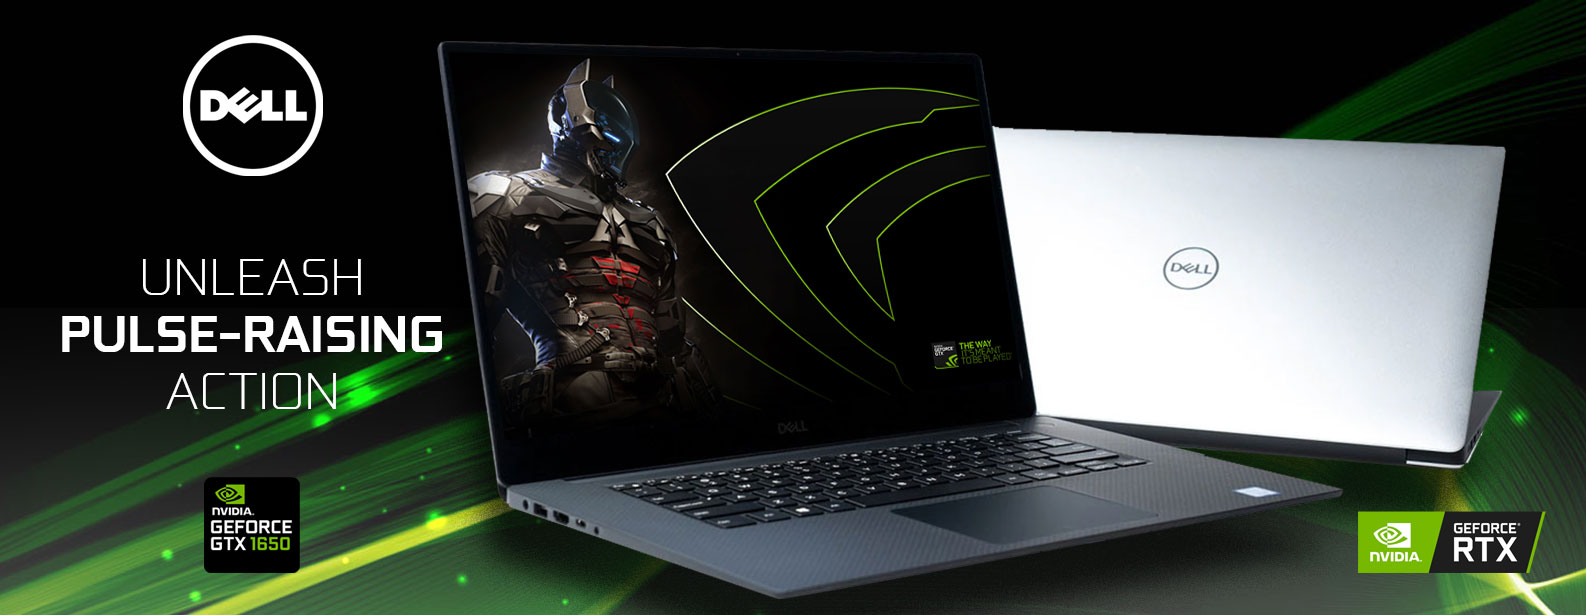 BEST DELL GTX 1650 Gaming Laptop Deals In South Africa